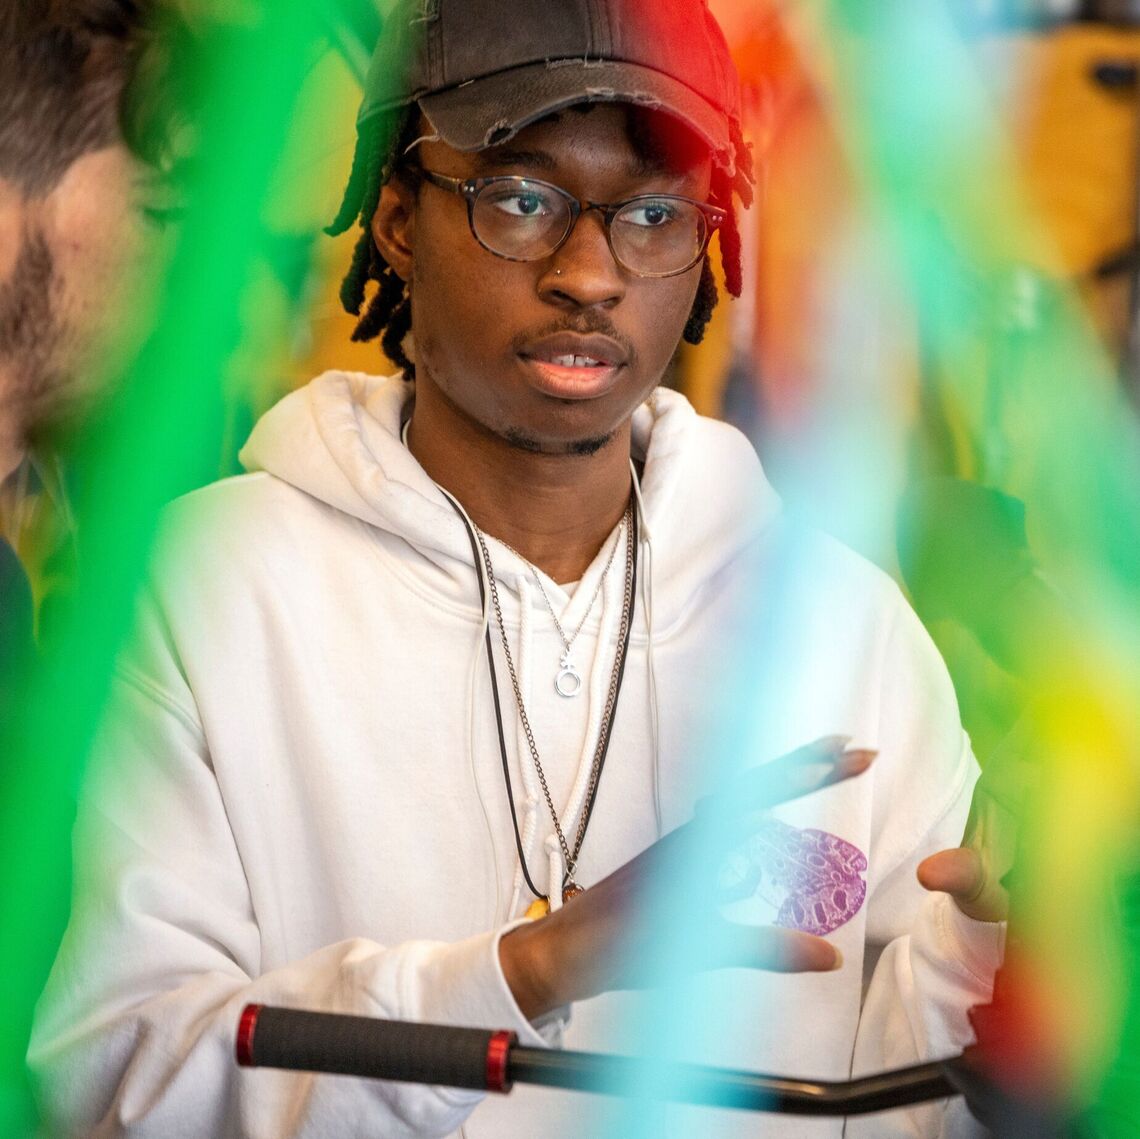 "It's talking about craft with others that brings a bit more warmth to my writing experience," says  Idris /Izzy Mansaray '23.